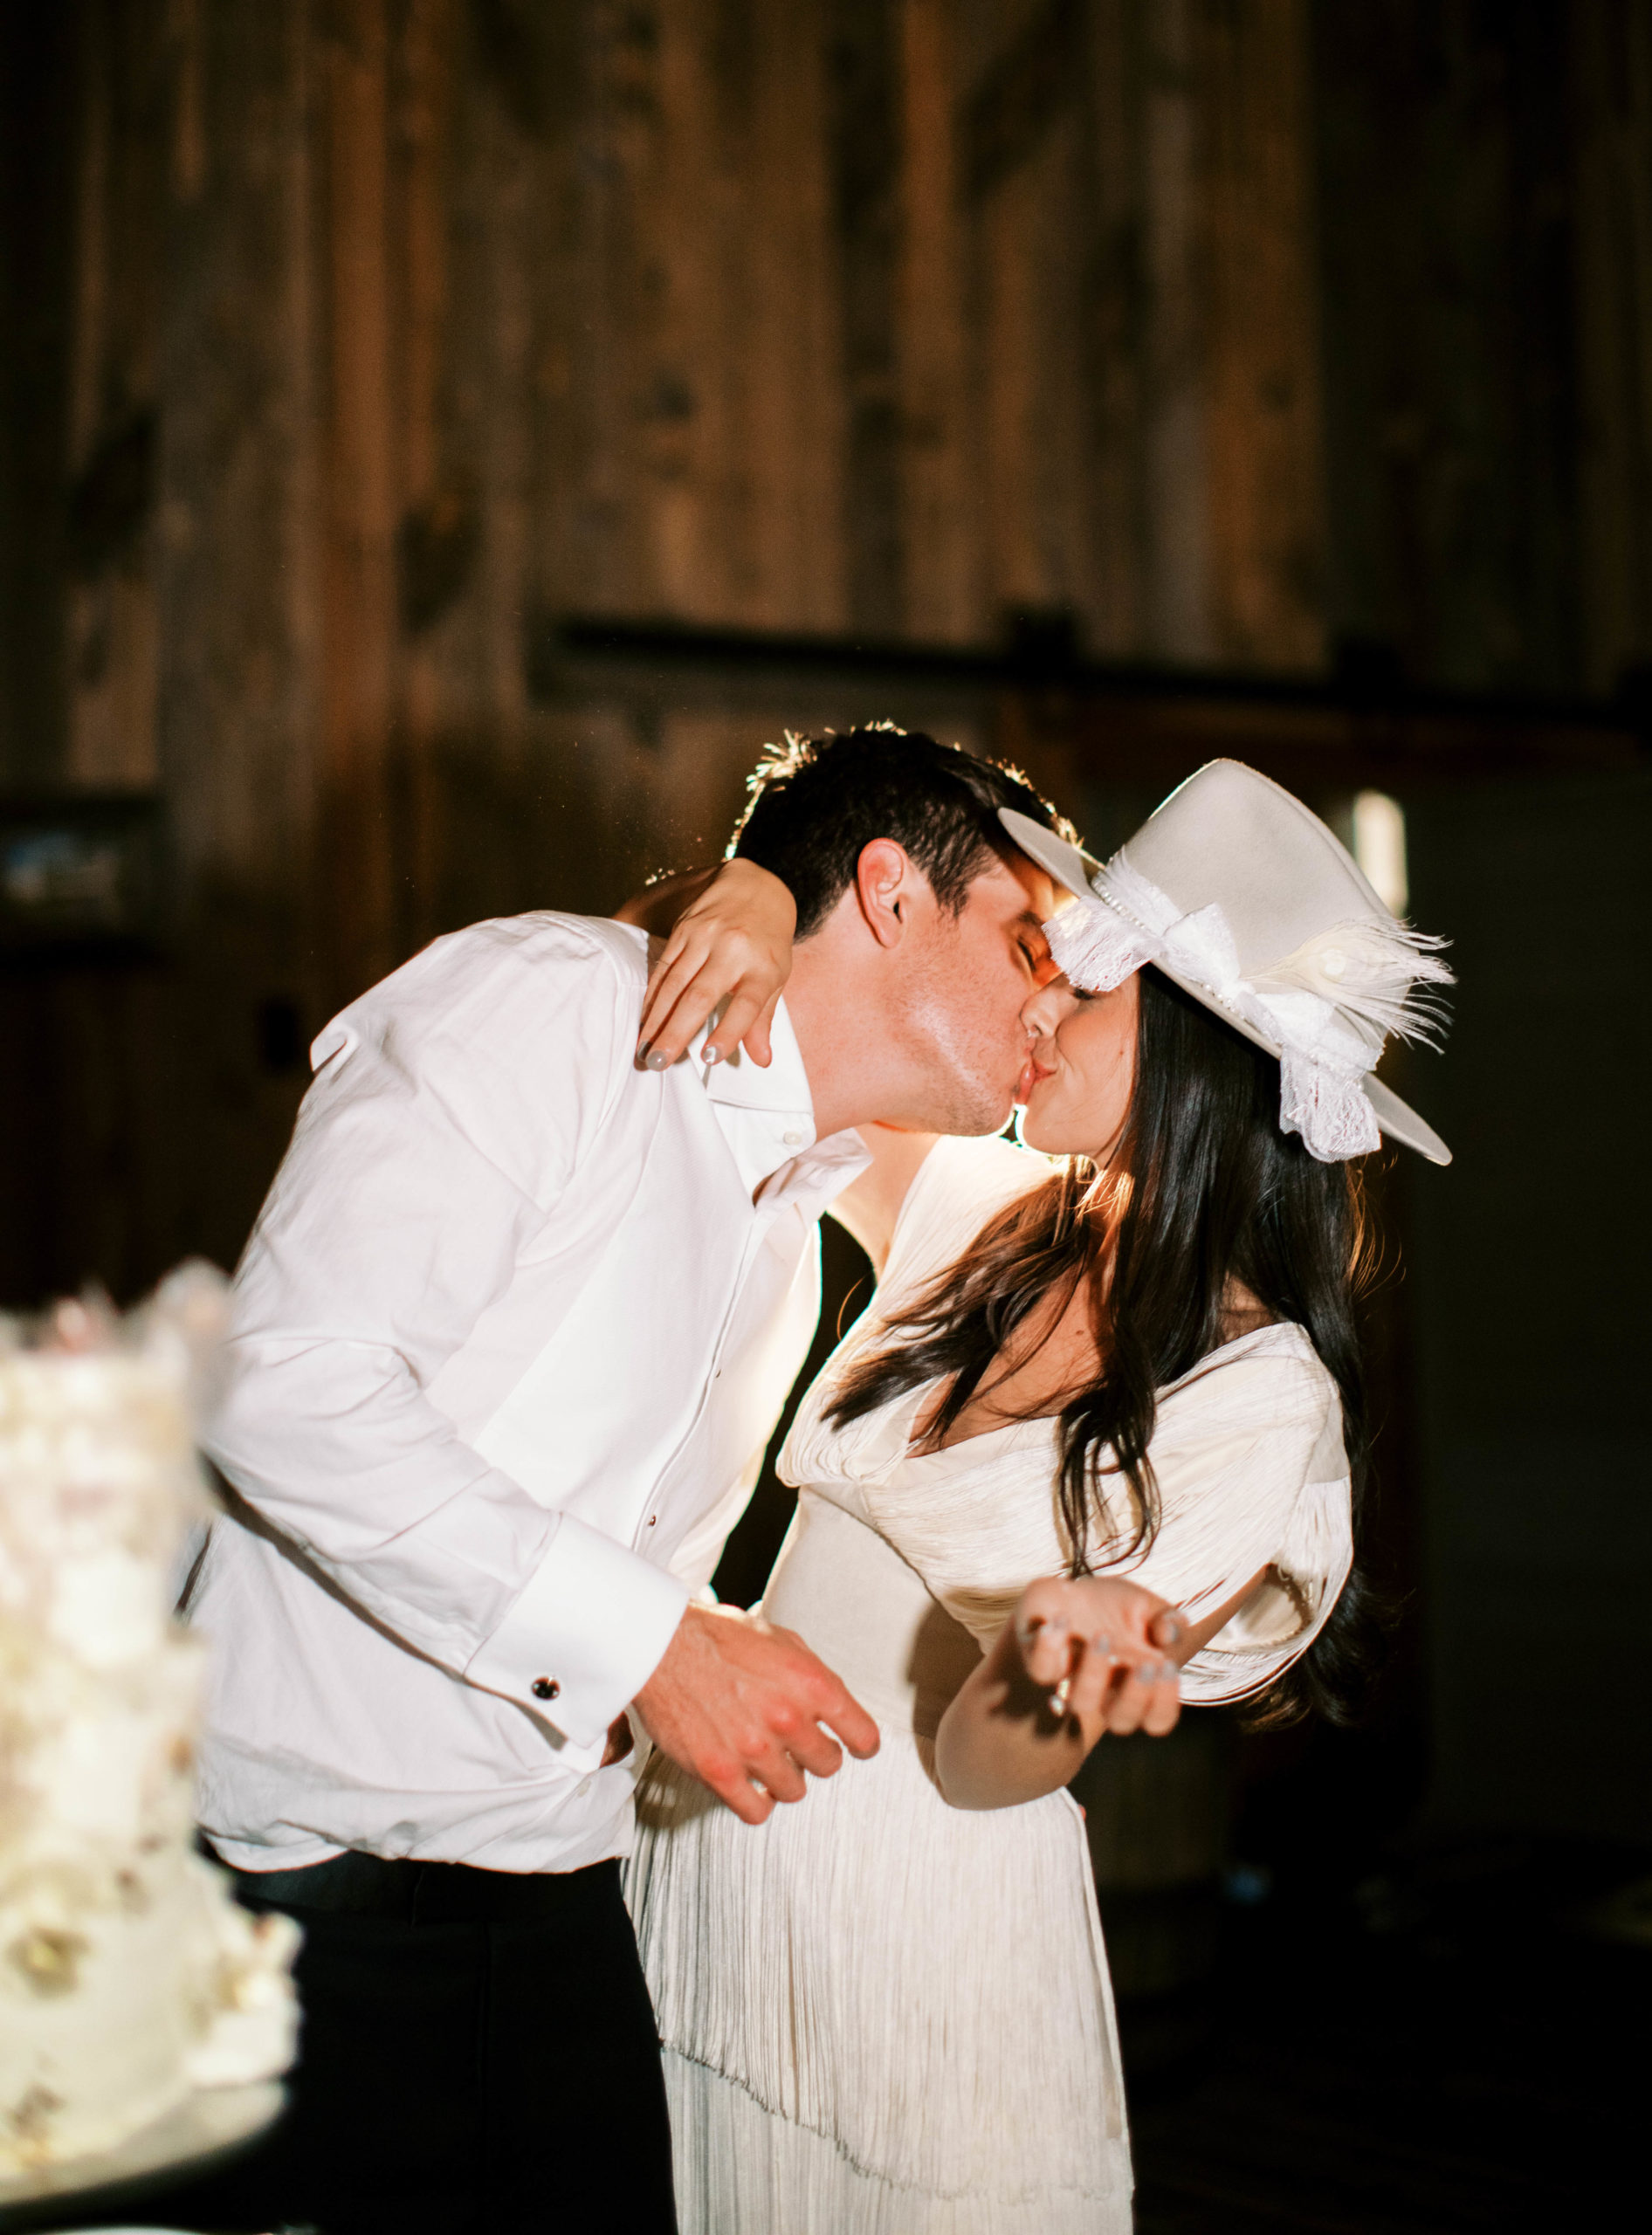 bride and groom kiss while cutting their cake at their utah ranch wedding. the bride wears a vintage wedding reception dress and white bridal hat. photo by megan robinson photography